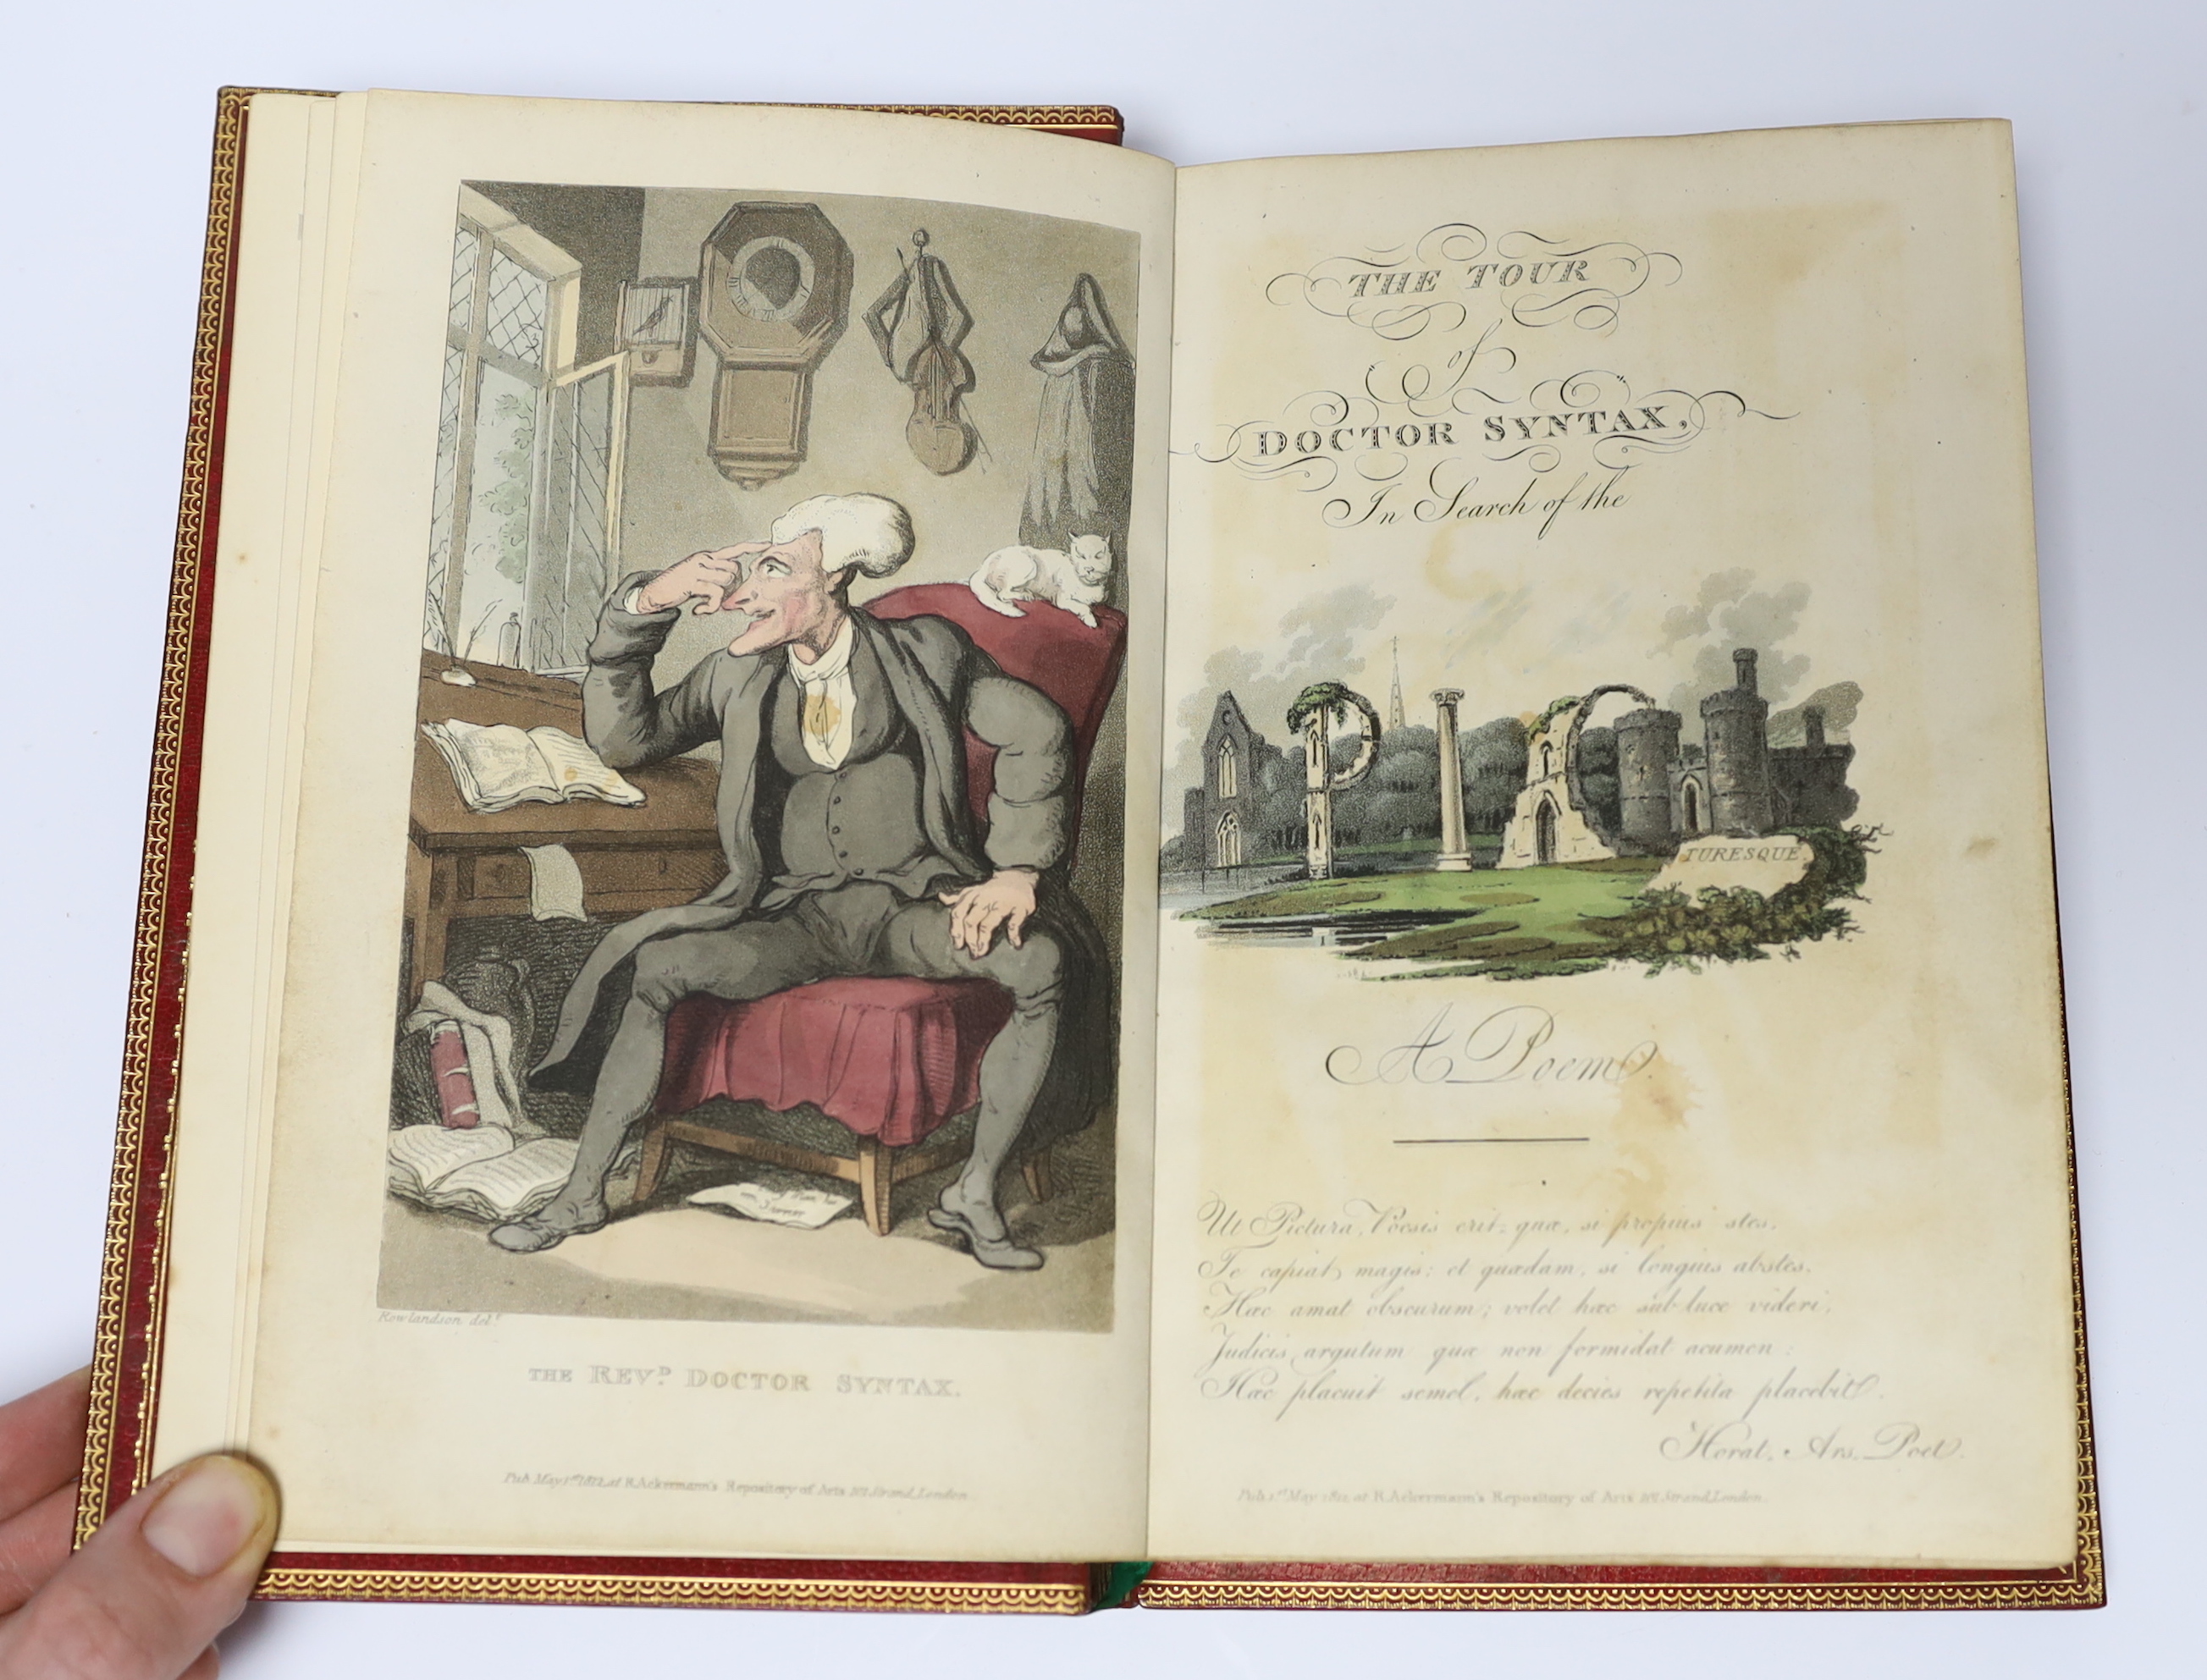 Combe, William - The Tour of Doctor Syntax in Search of the Picturesque. A Poem. 1st edition, 8vo, in later fine red crushed morocco gilt binding by H. Sotheran & Co., London, illustrated by Thomas Rowlandson, with front